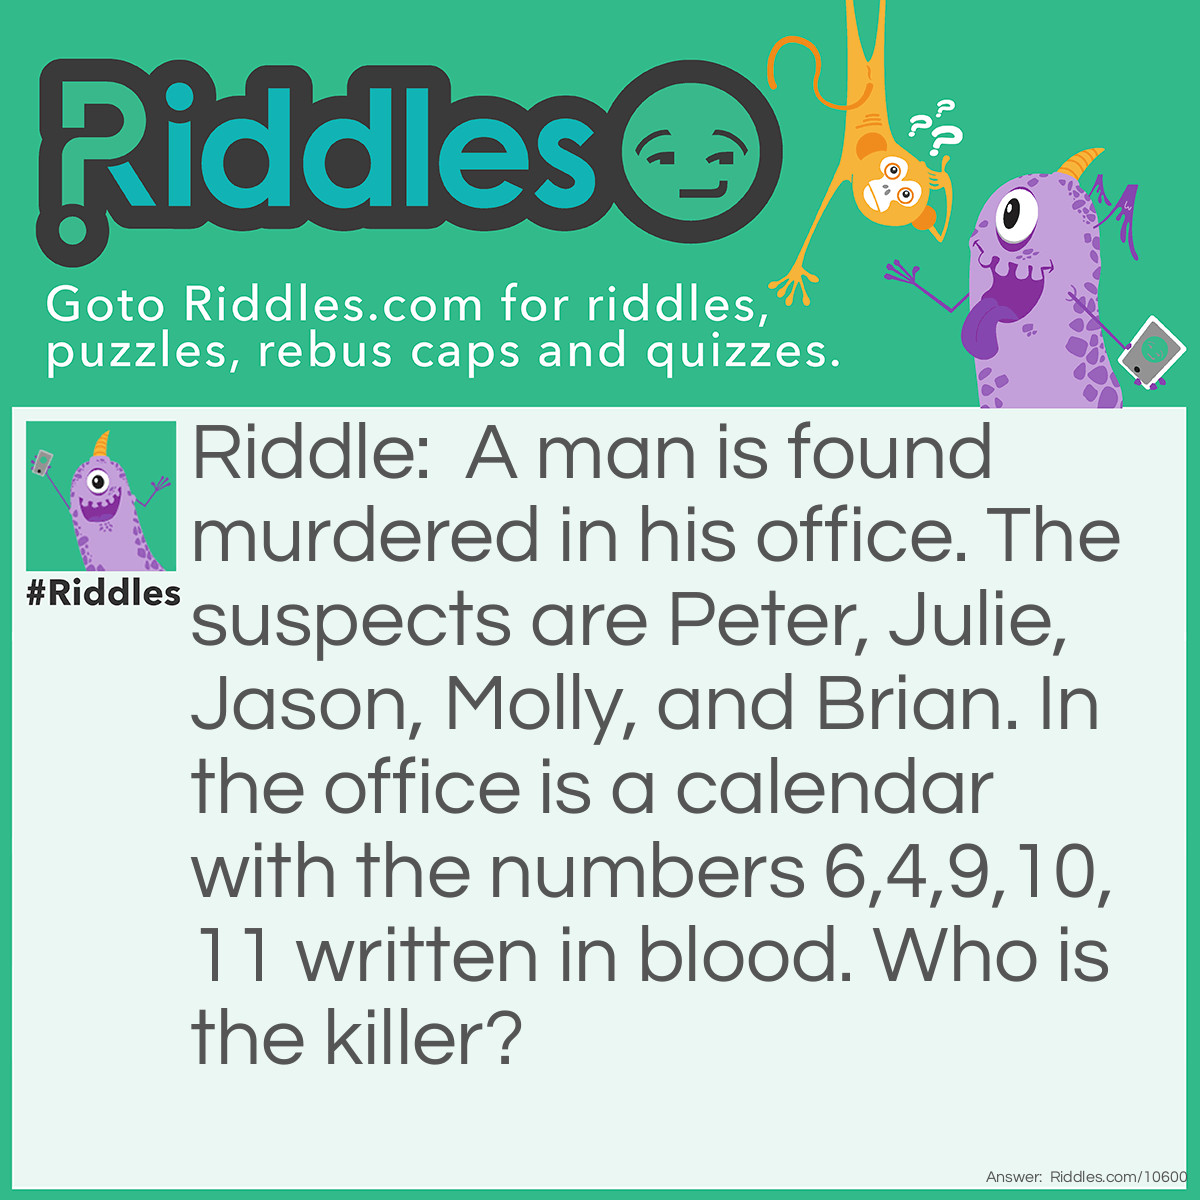 Riddle: A man is found murdered in his office. The suspects are Peter, Julie, Jason, Molly, and Brian. In the office is a calendar with the numbers 6,4,9,10,11 written in blood. Who is the killer? Answer: Jason is the killer. The numbers indicate months and the first letter of each month spells the name of the murderer, e.g. the 6th month is June and the first letter of June is J, the 4th month is April and the first letter of April is a, and so on.